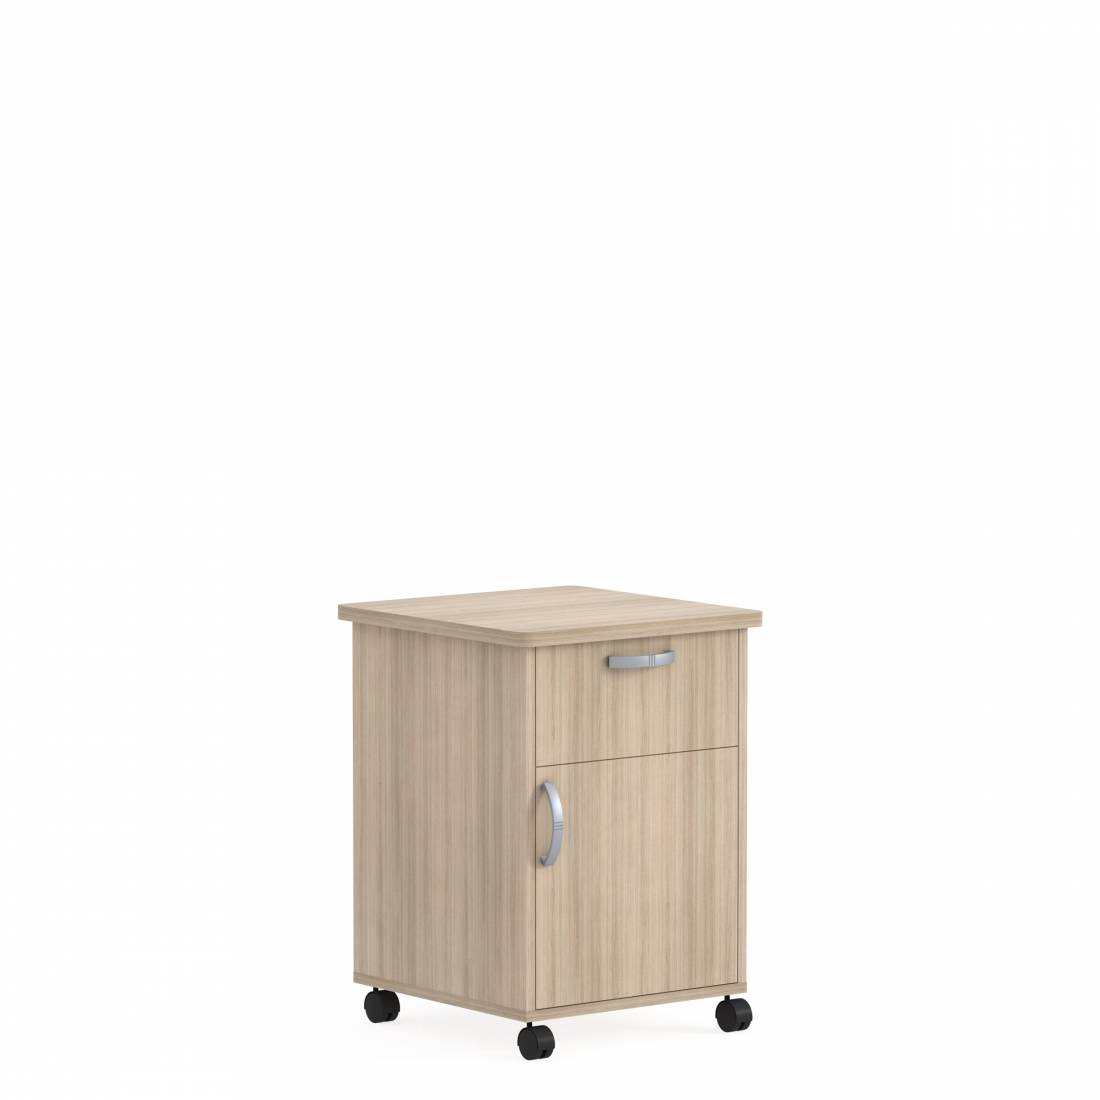 Bedside Cabinet, Casters, Drawer, Right Opening Door